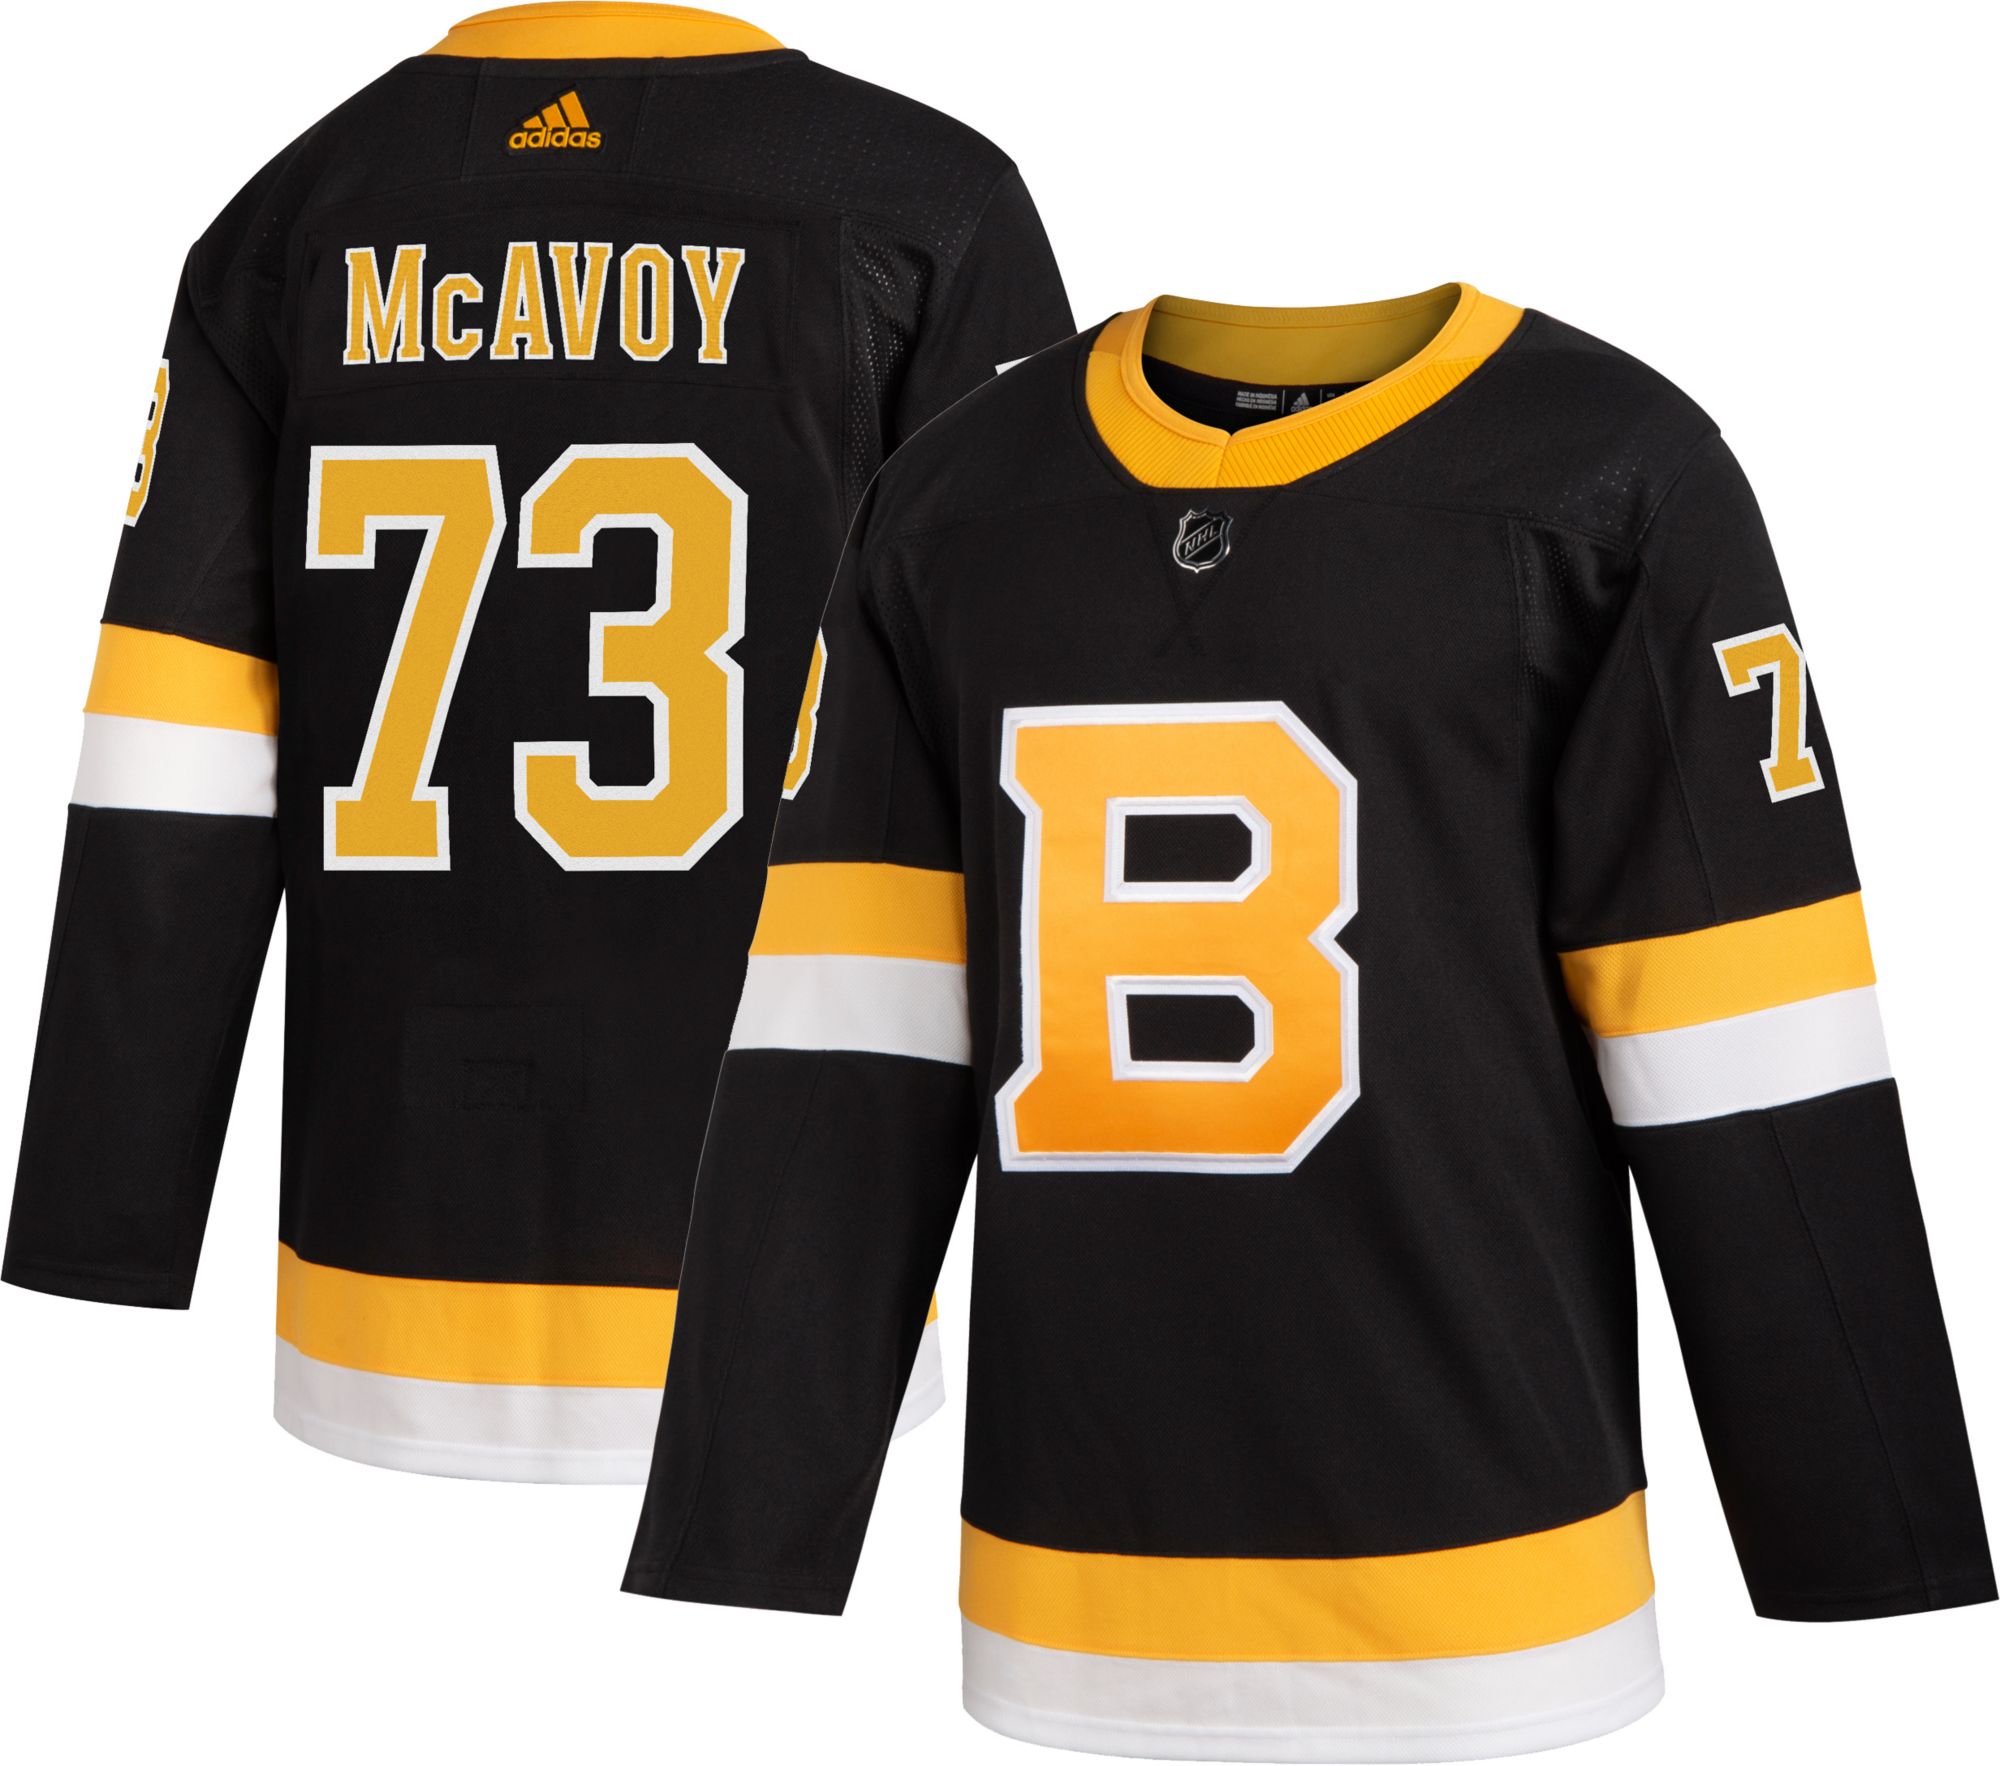 charlie mcavoy jersey number